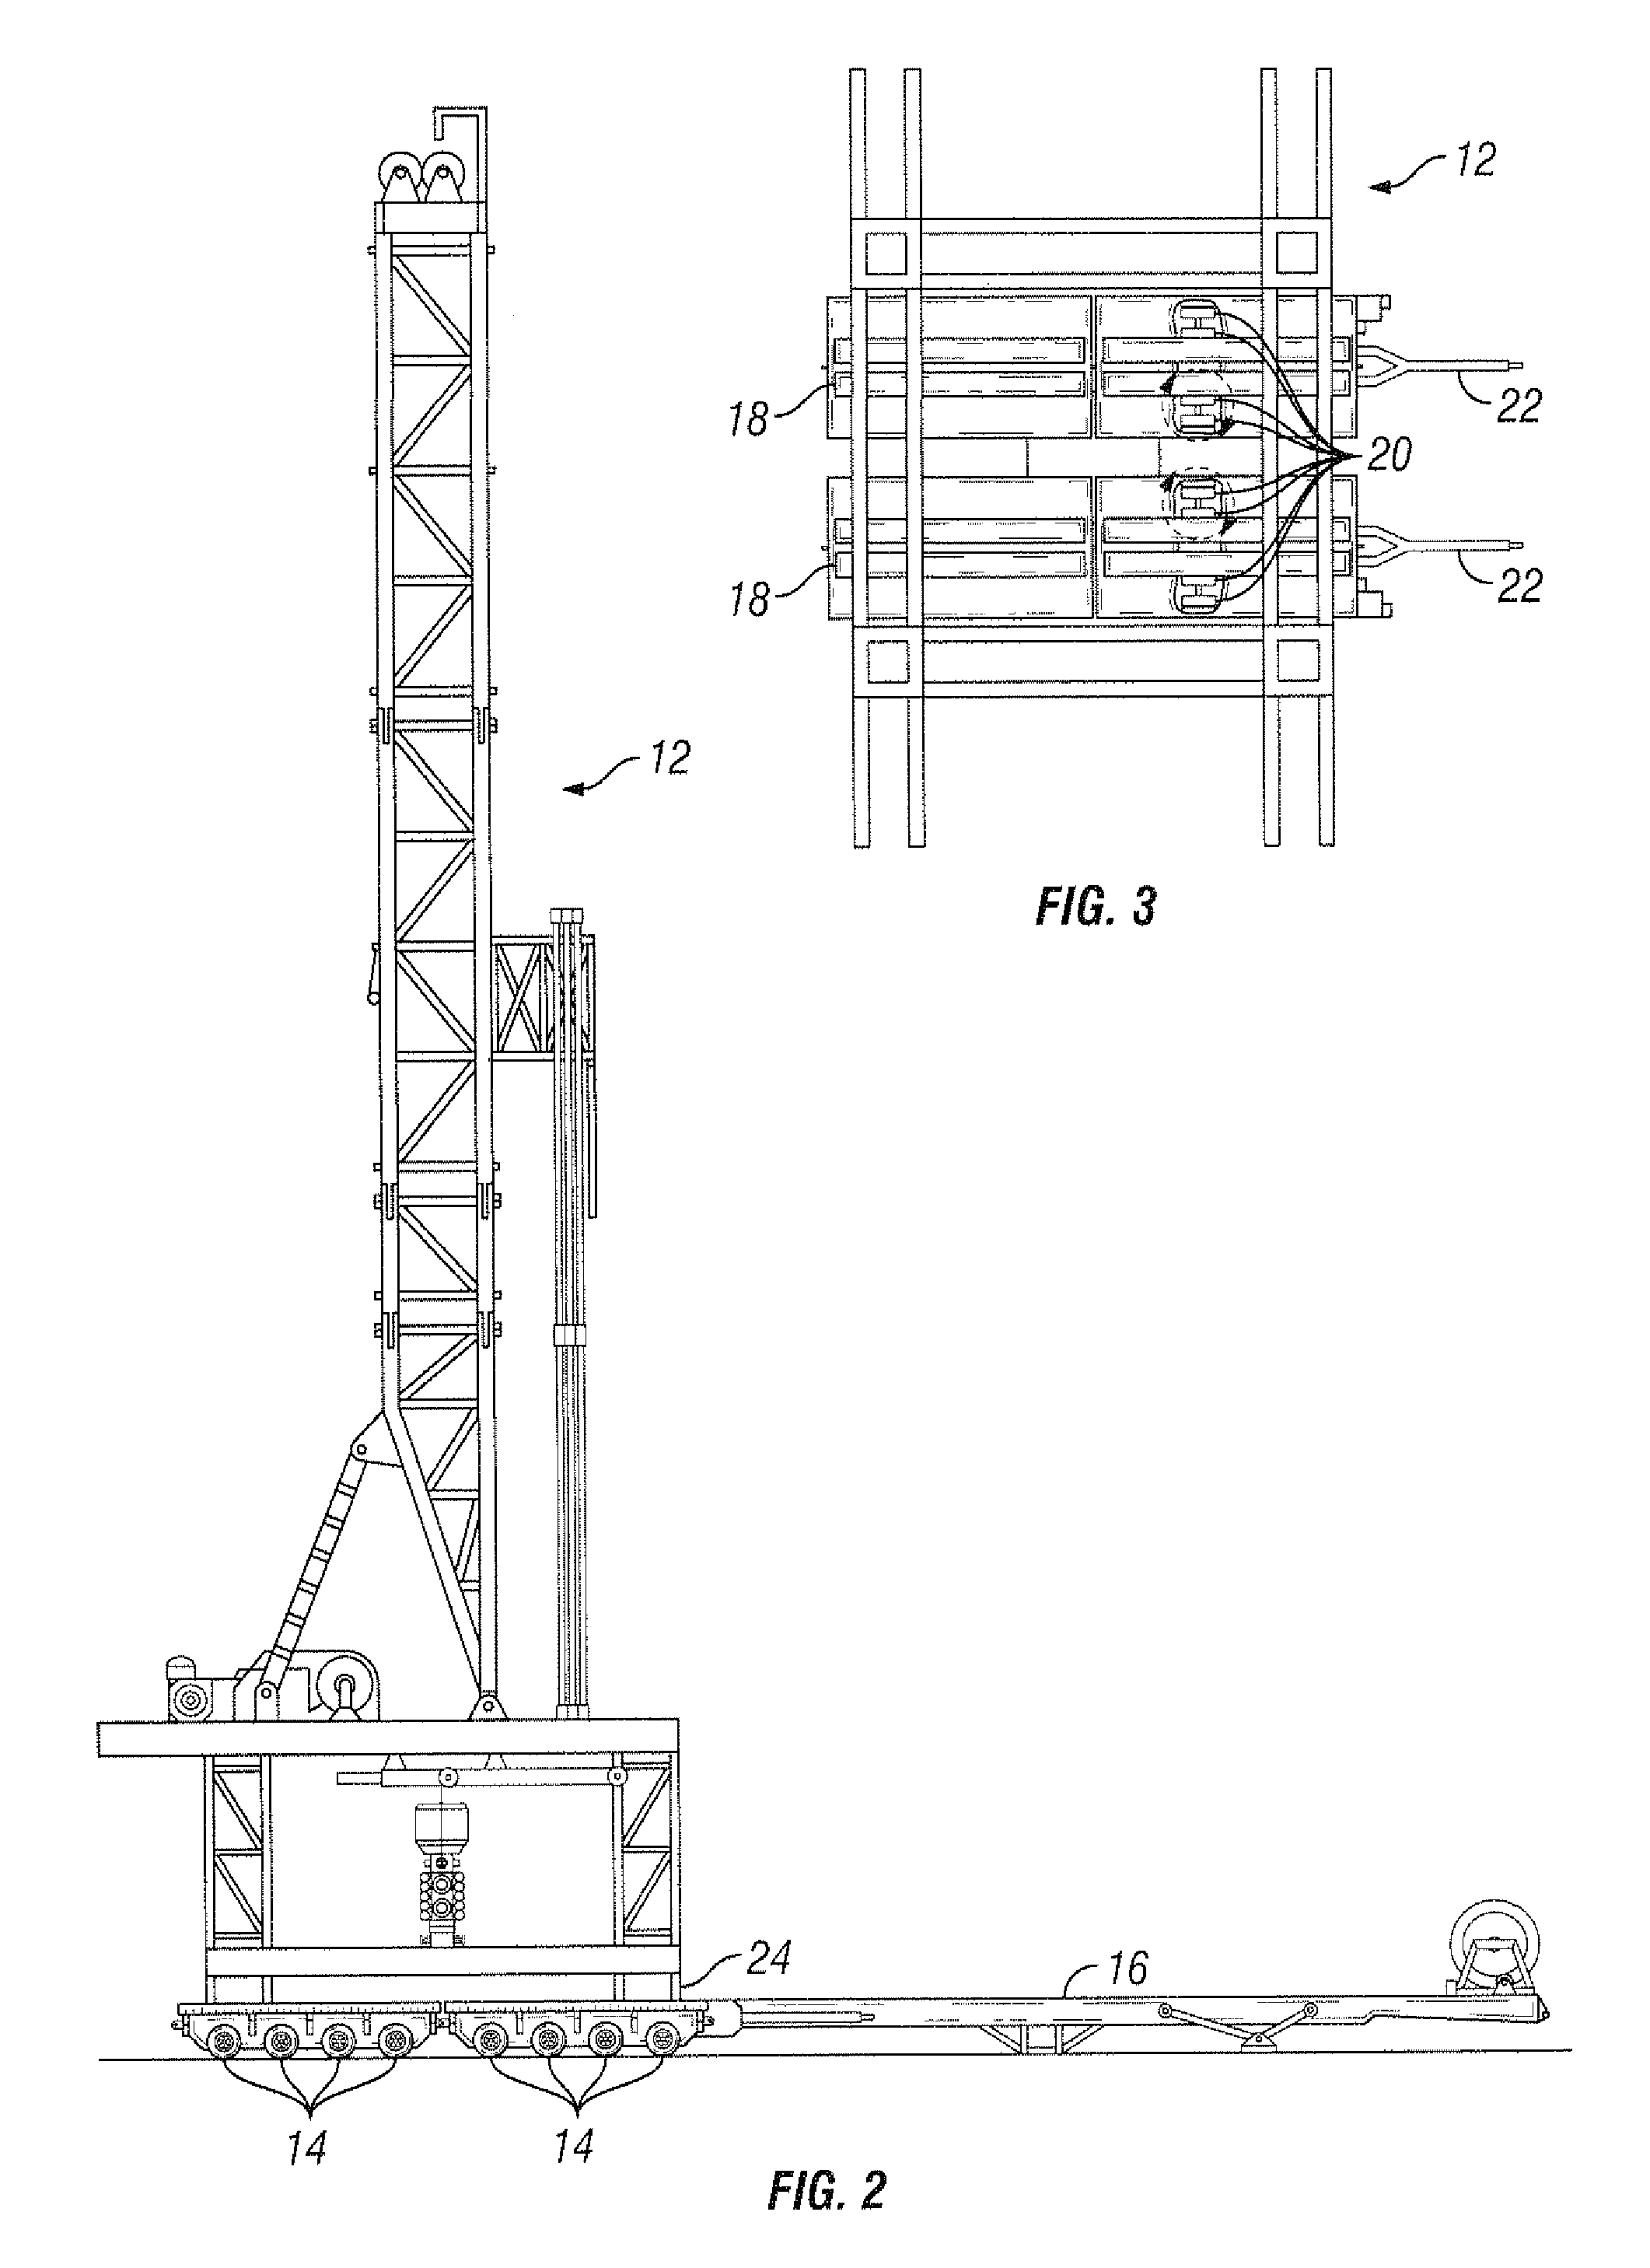 Drilling rig with hinged, retractable outriggers